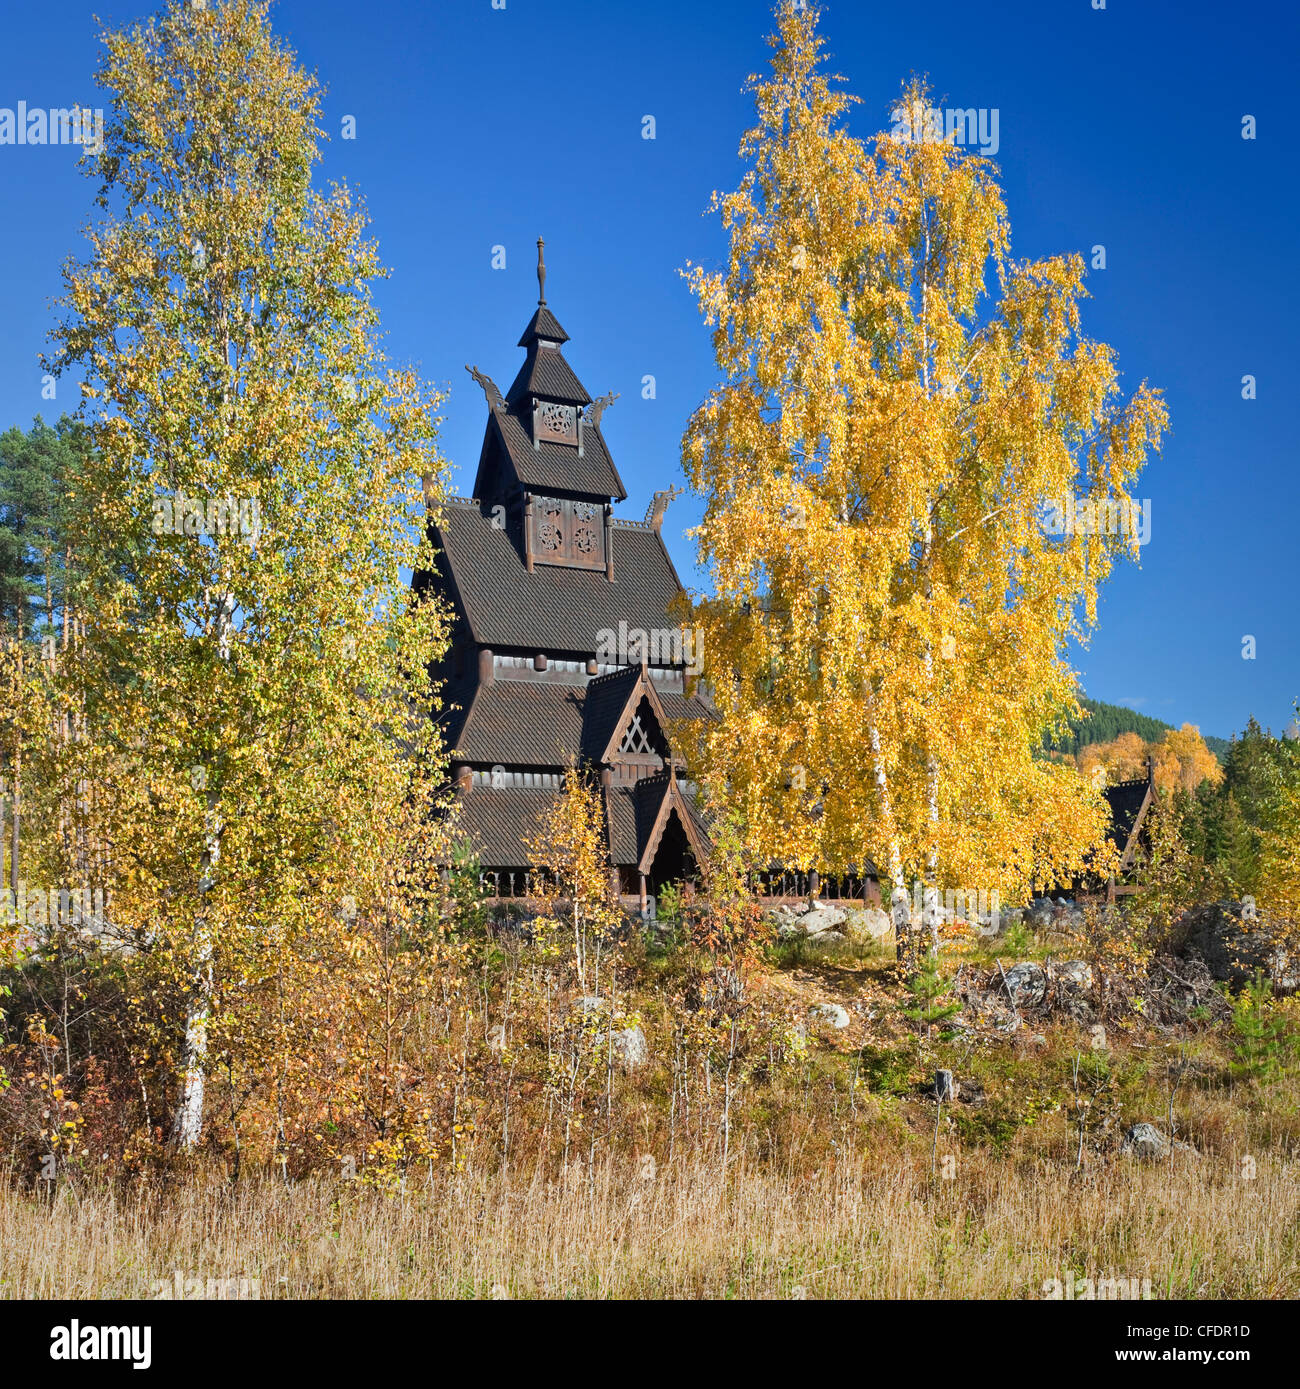 Replica of the Gol stave church, Norwegian Museum of Cultural History, Bygdoy, Norway Stock Photo